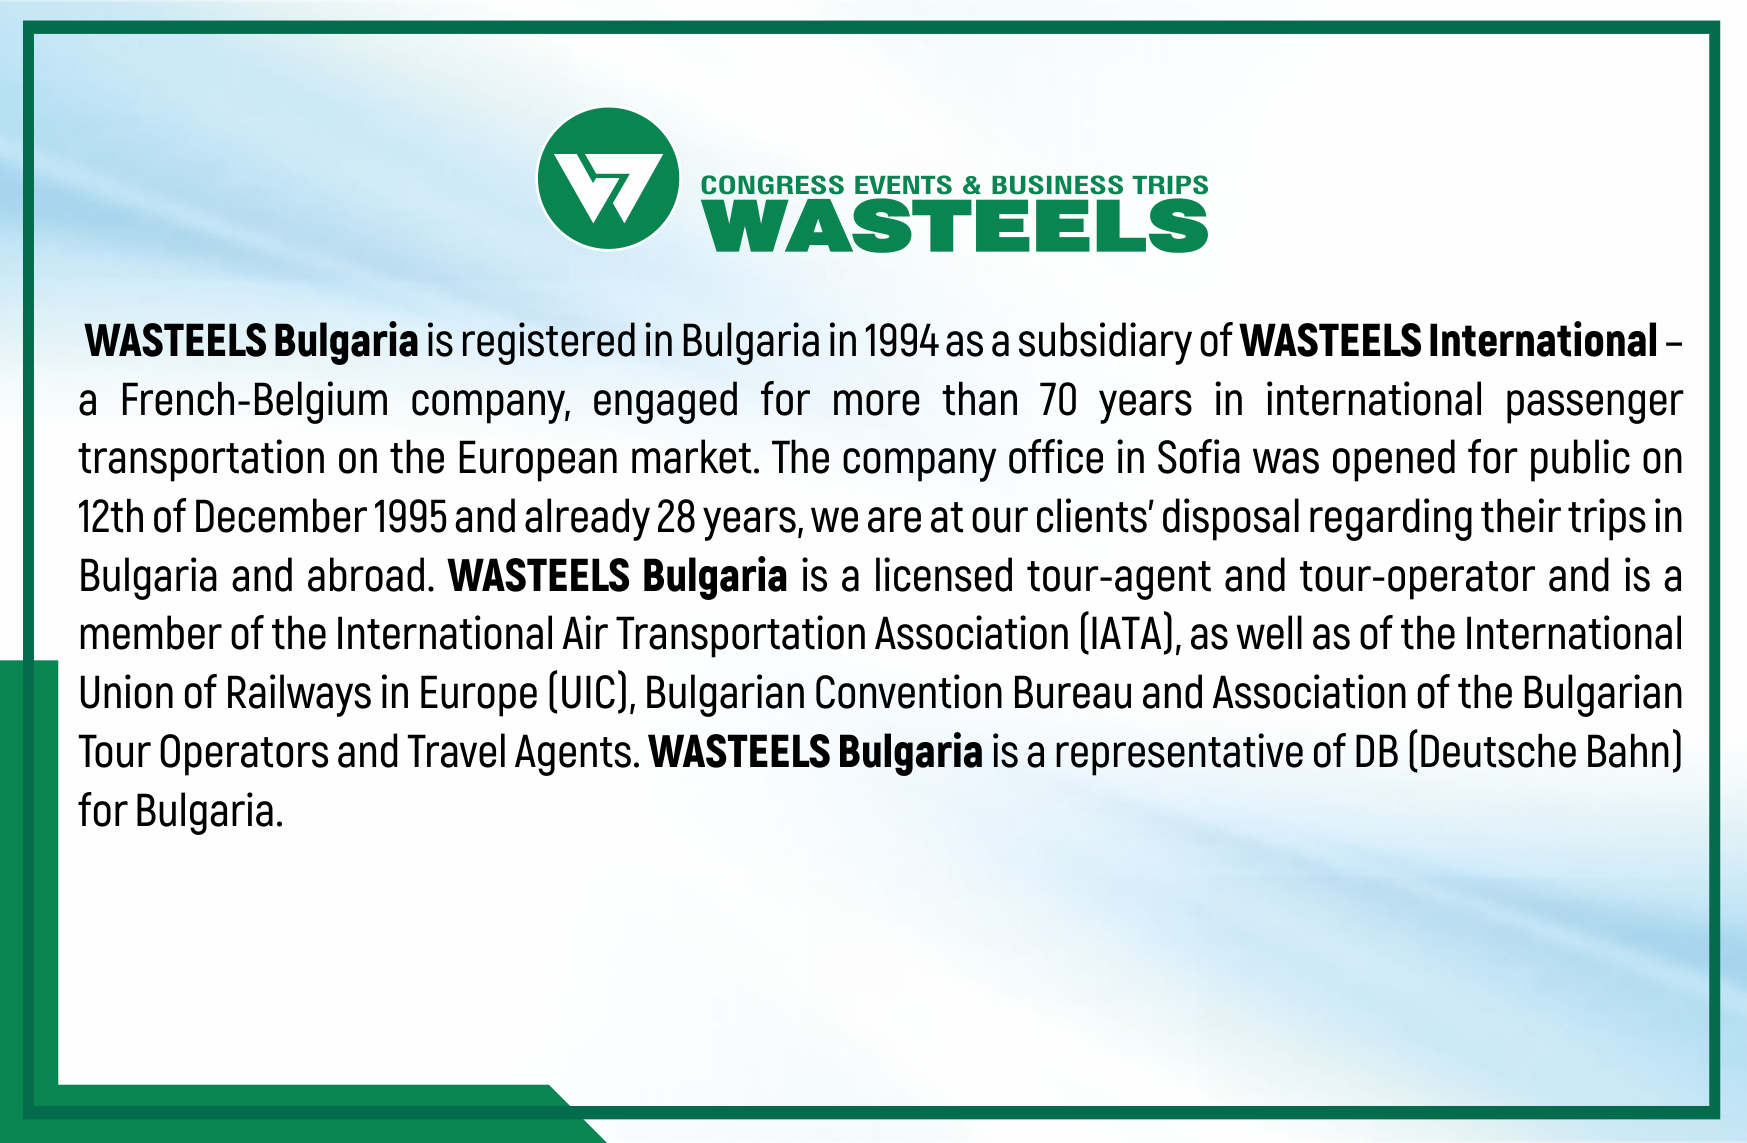 Information about Wasteels Bulgaria